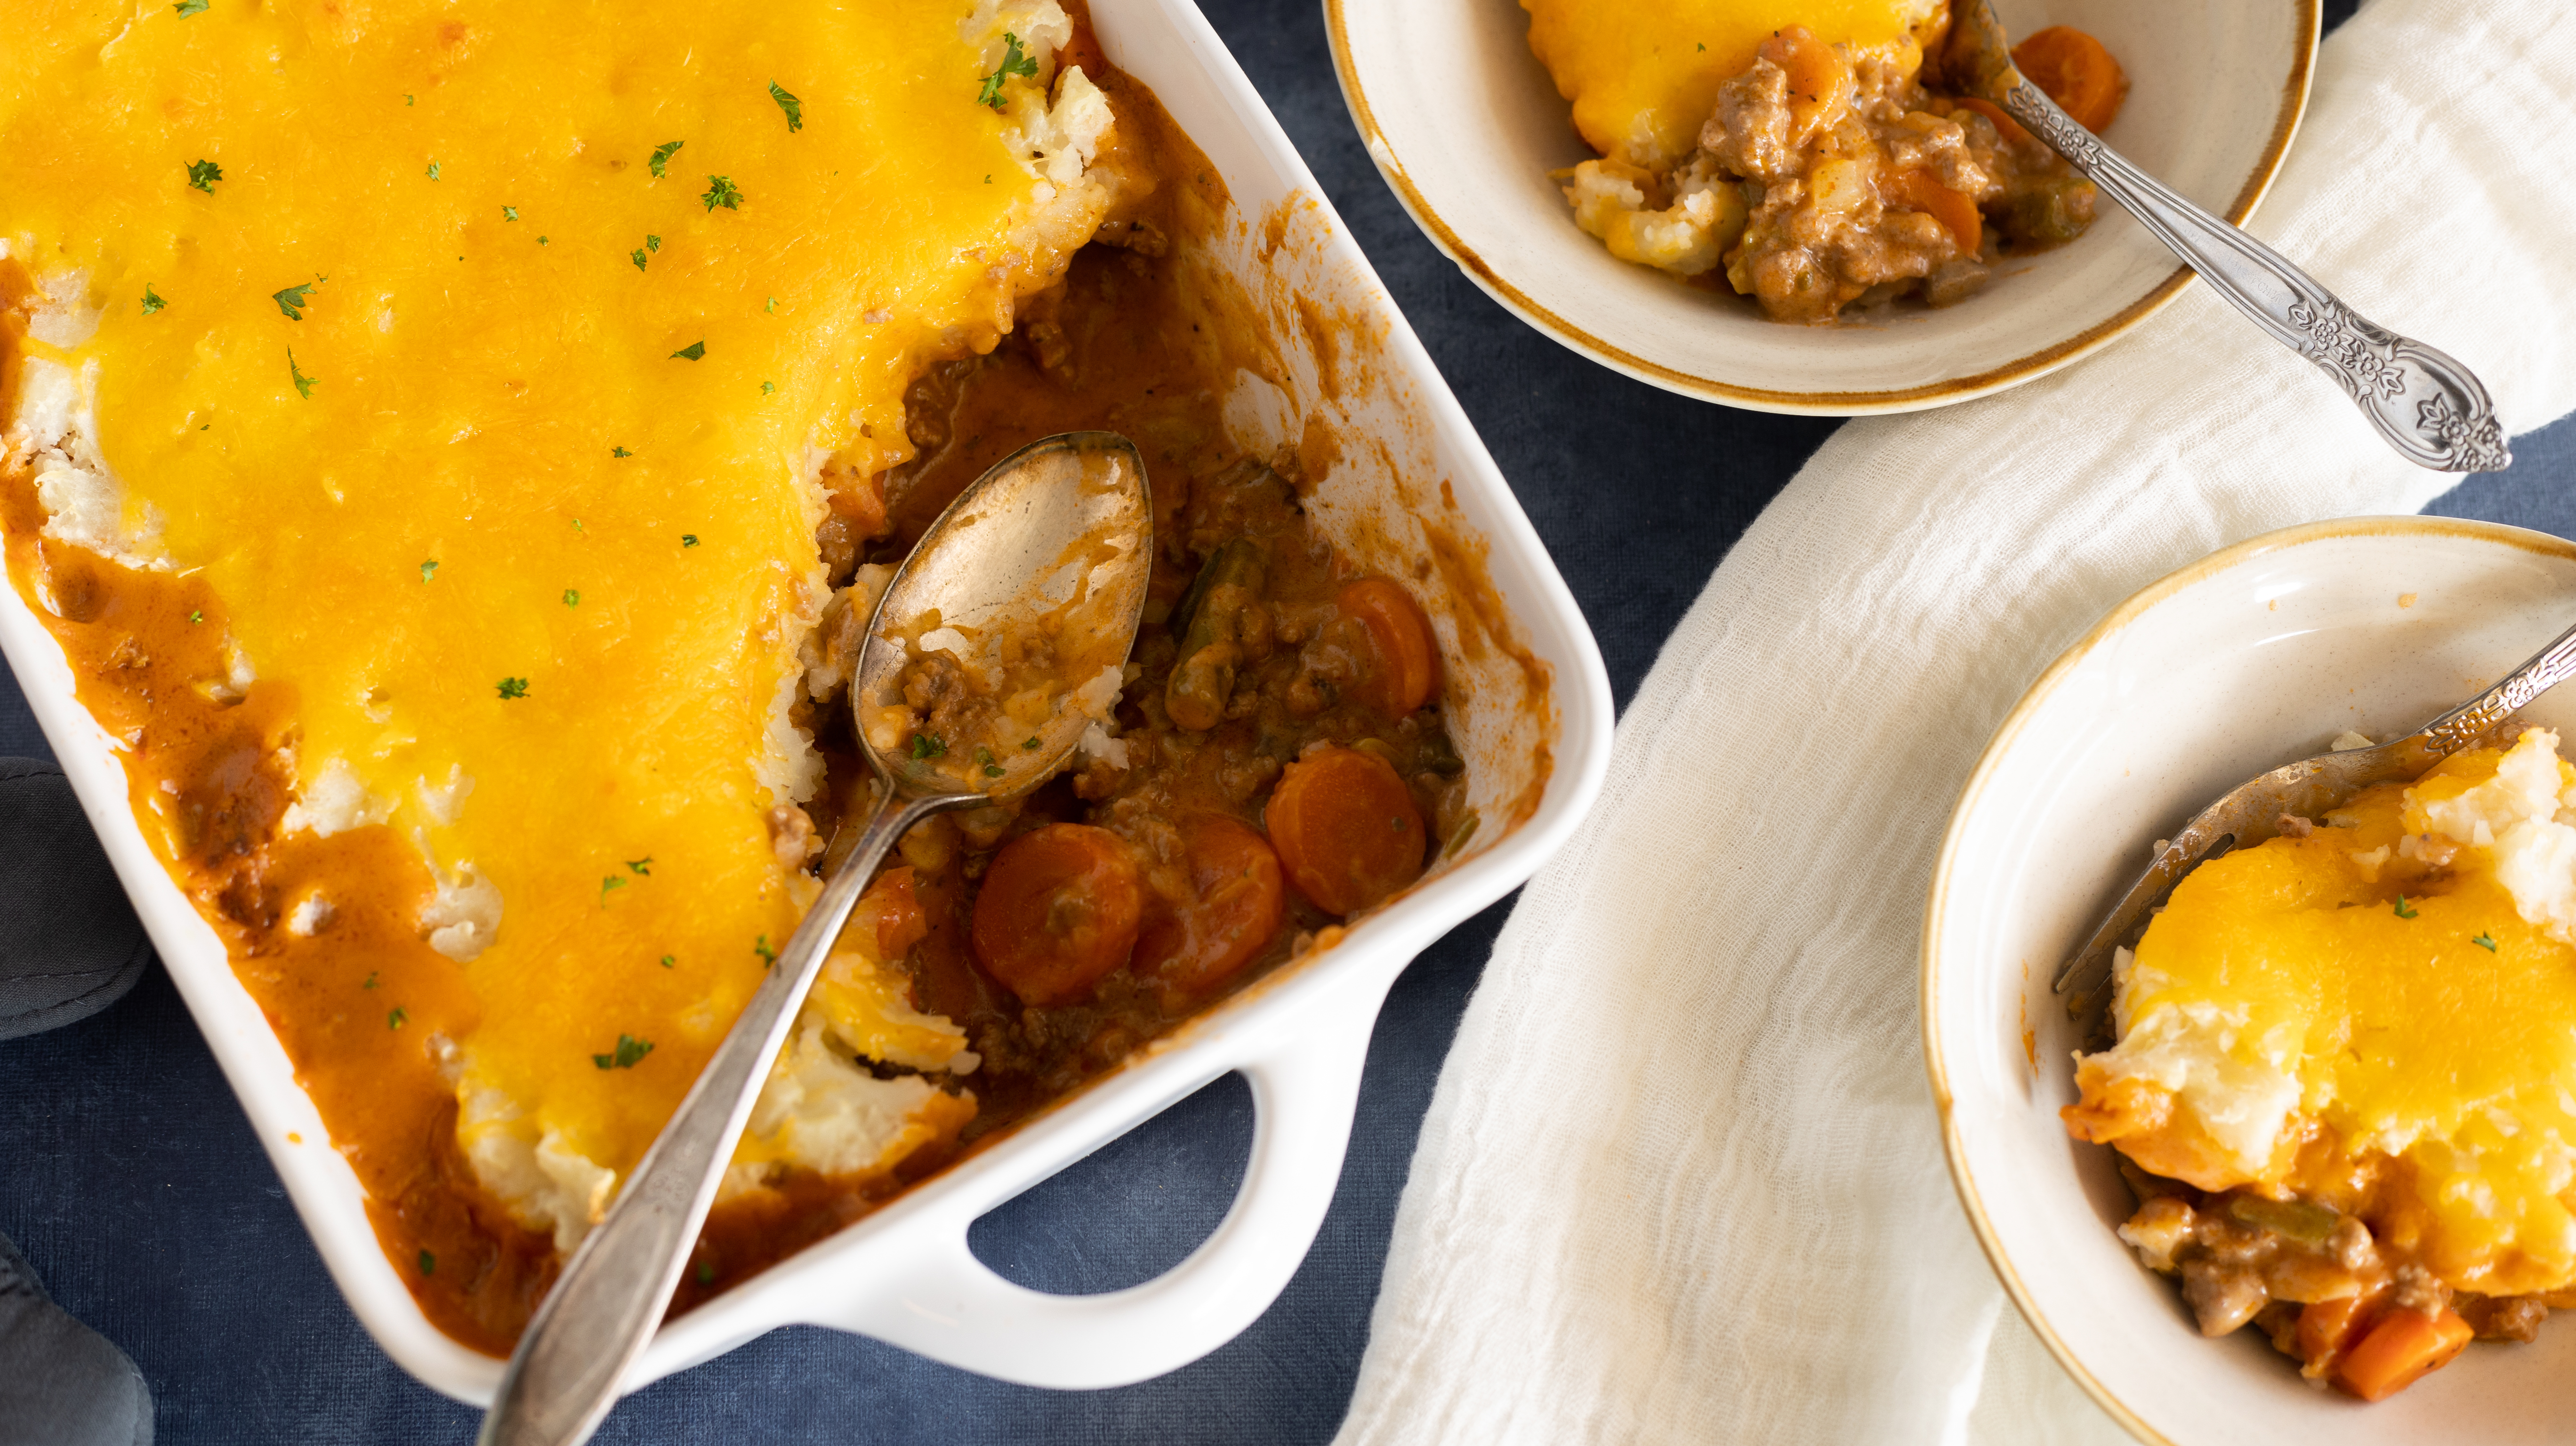 11 secrets to the perfect casserole to enjoy with family